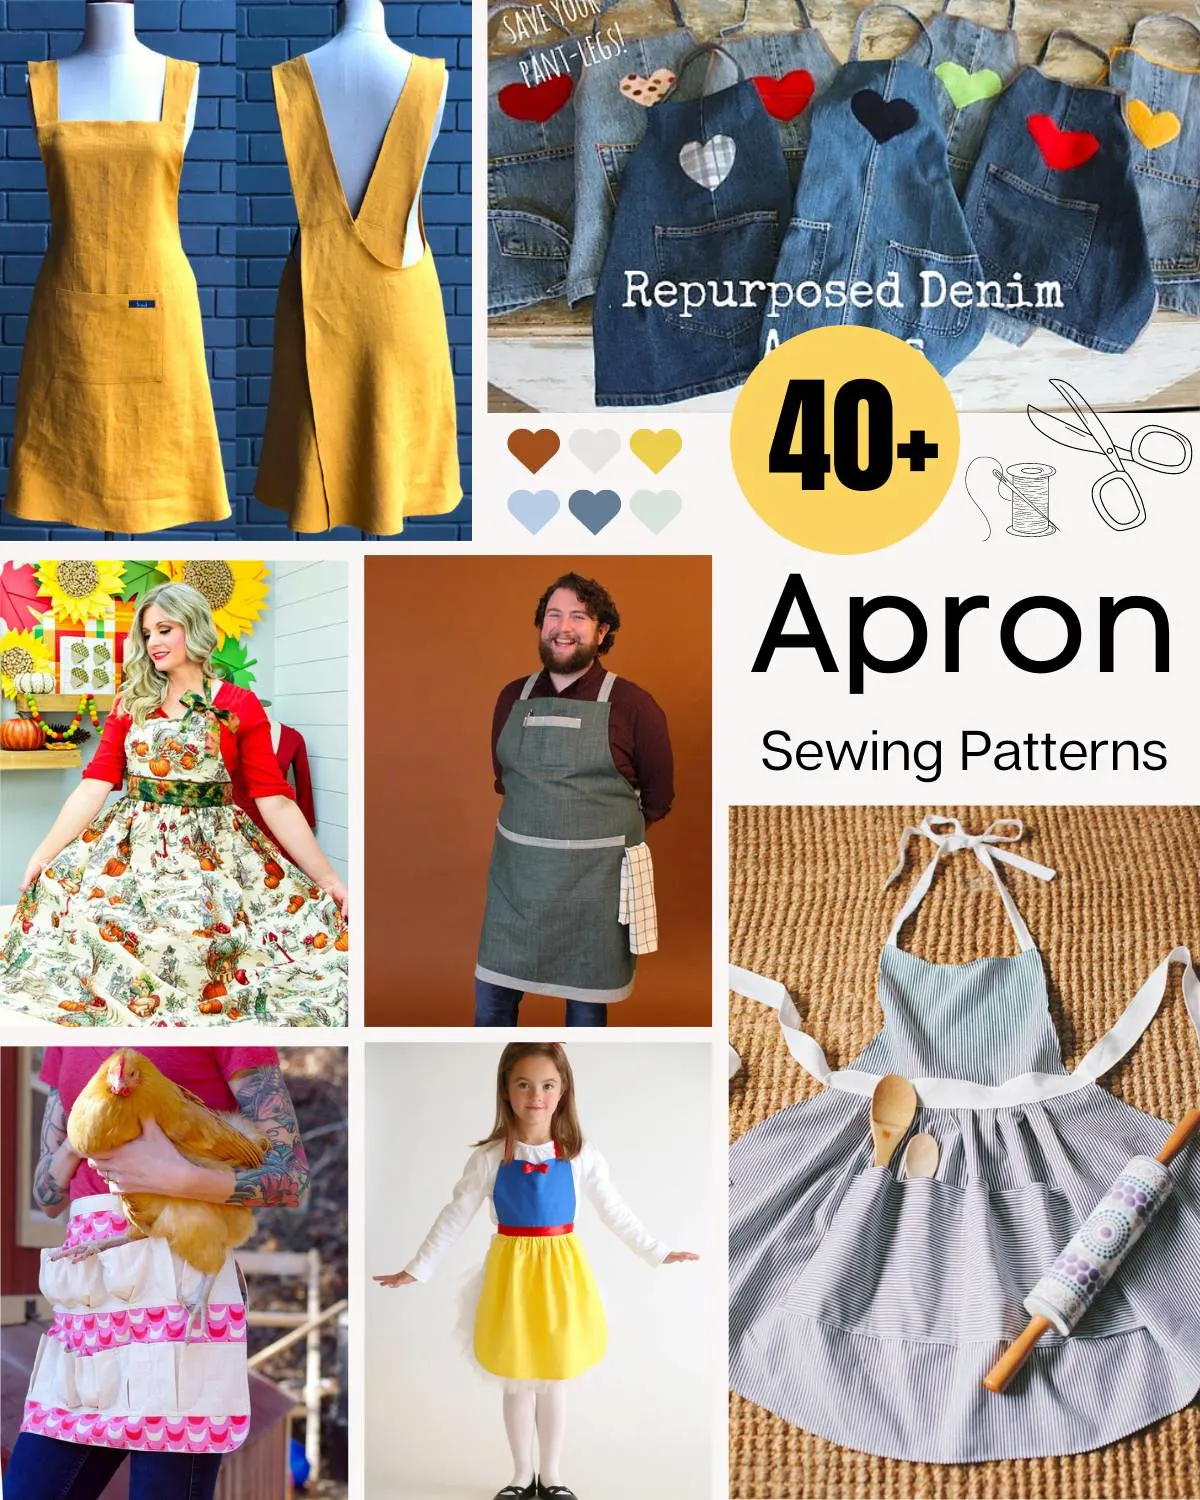 How to make an apron step-by-step · VickyMyersCreations